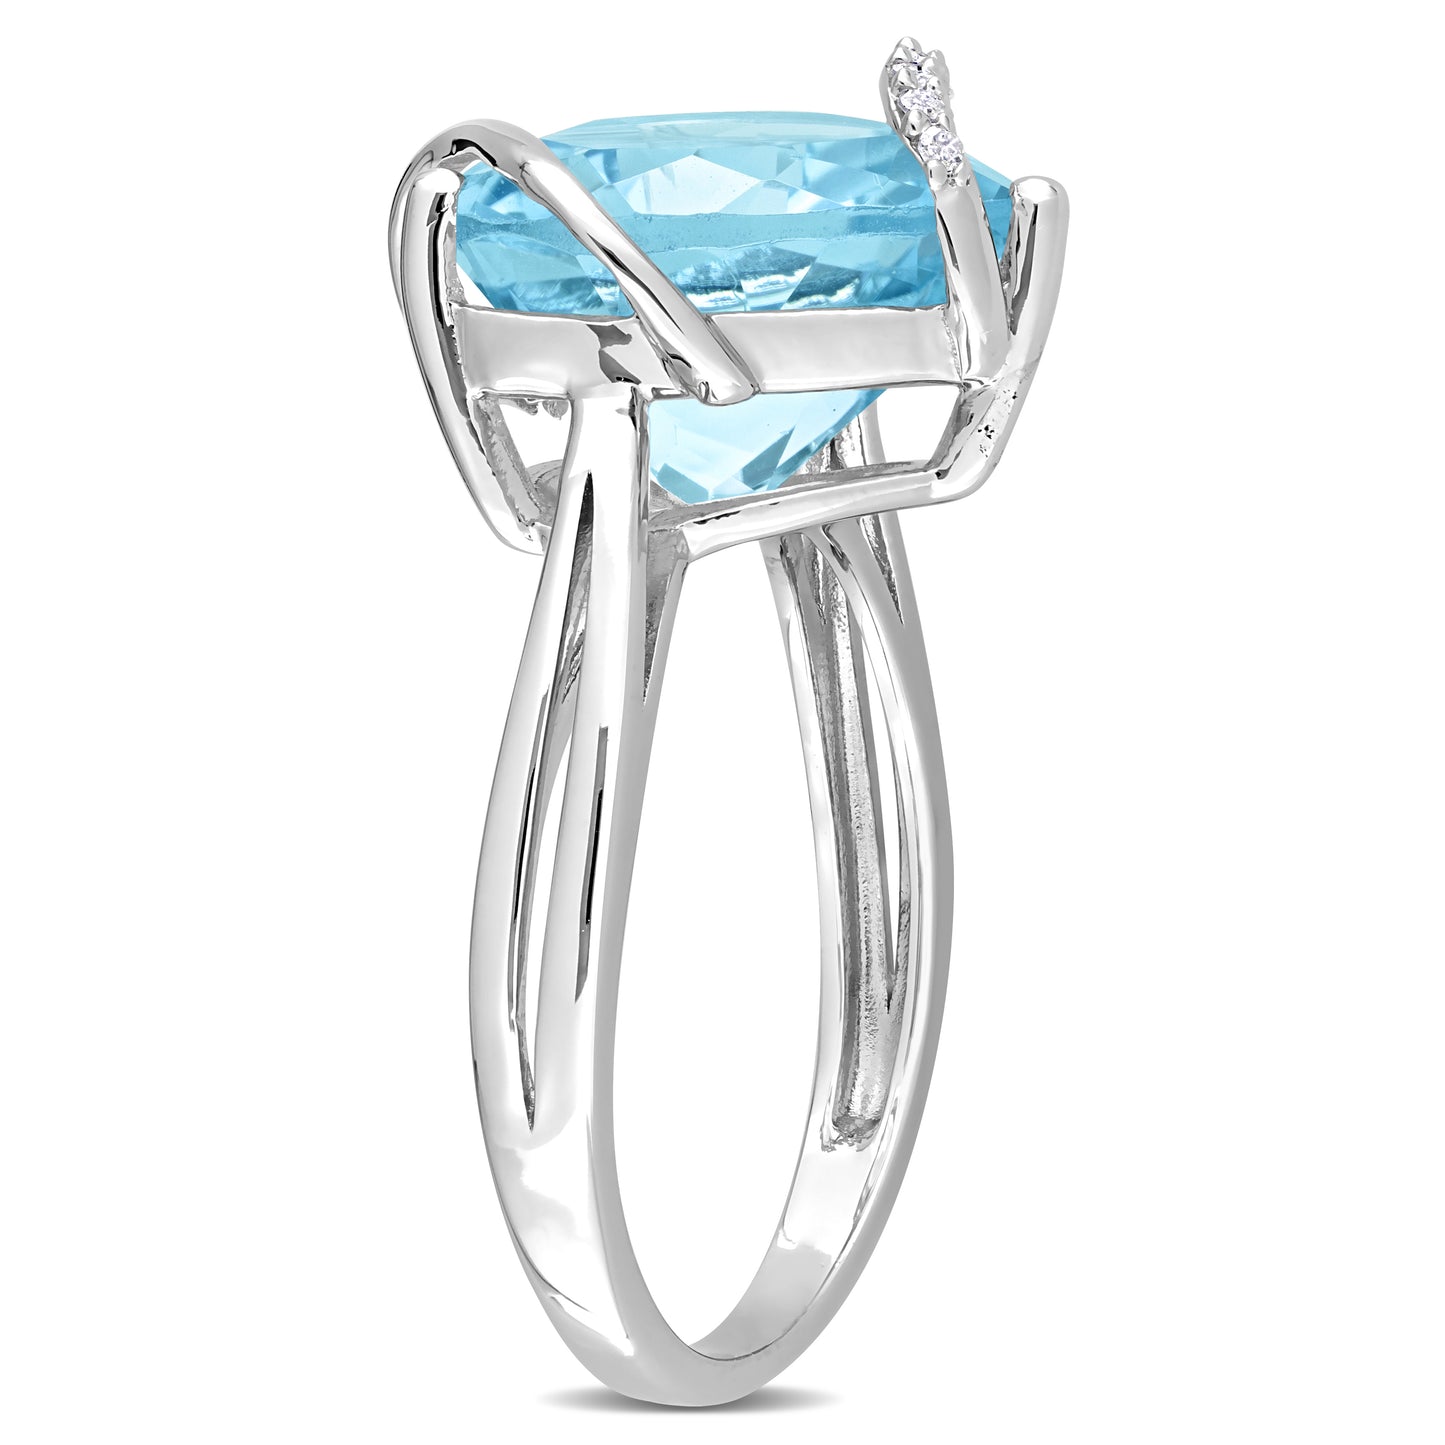 0.05ct Diamond & 7ct Blue Topaz Ring in Sterling Silver